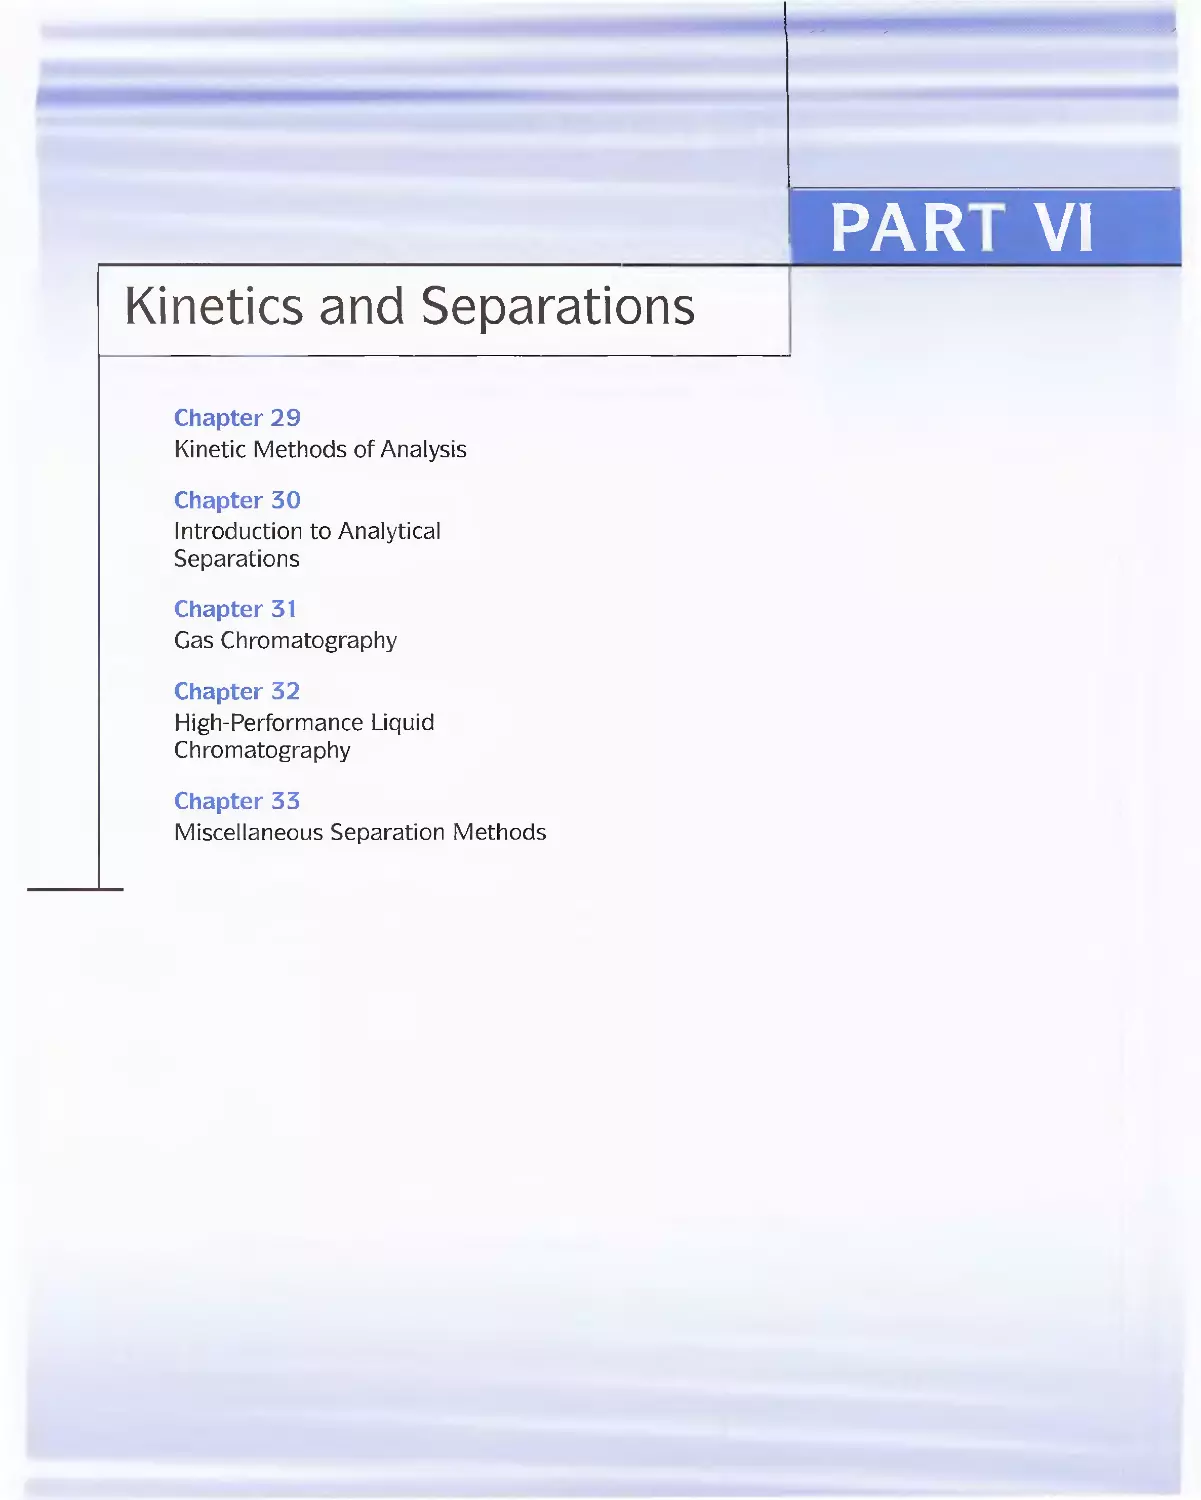 Part 6 - Kinetics and Separations